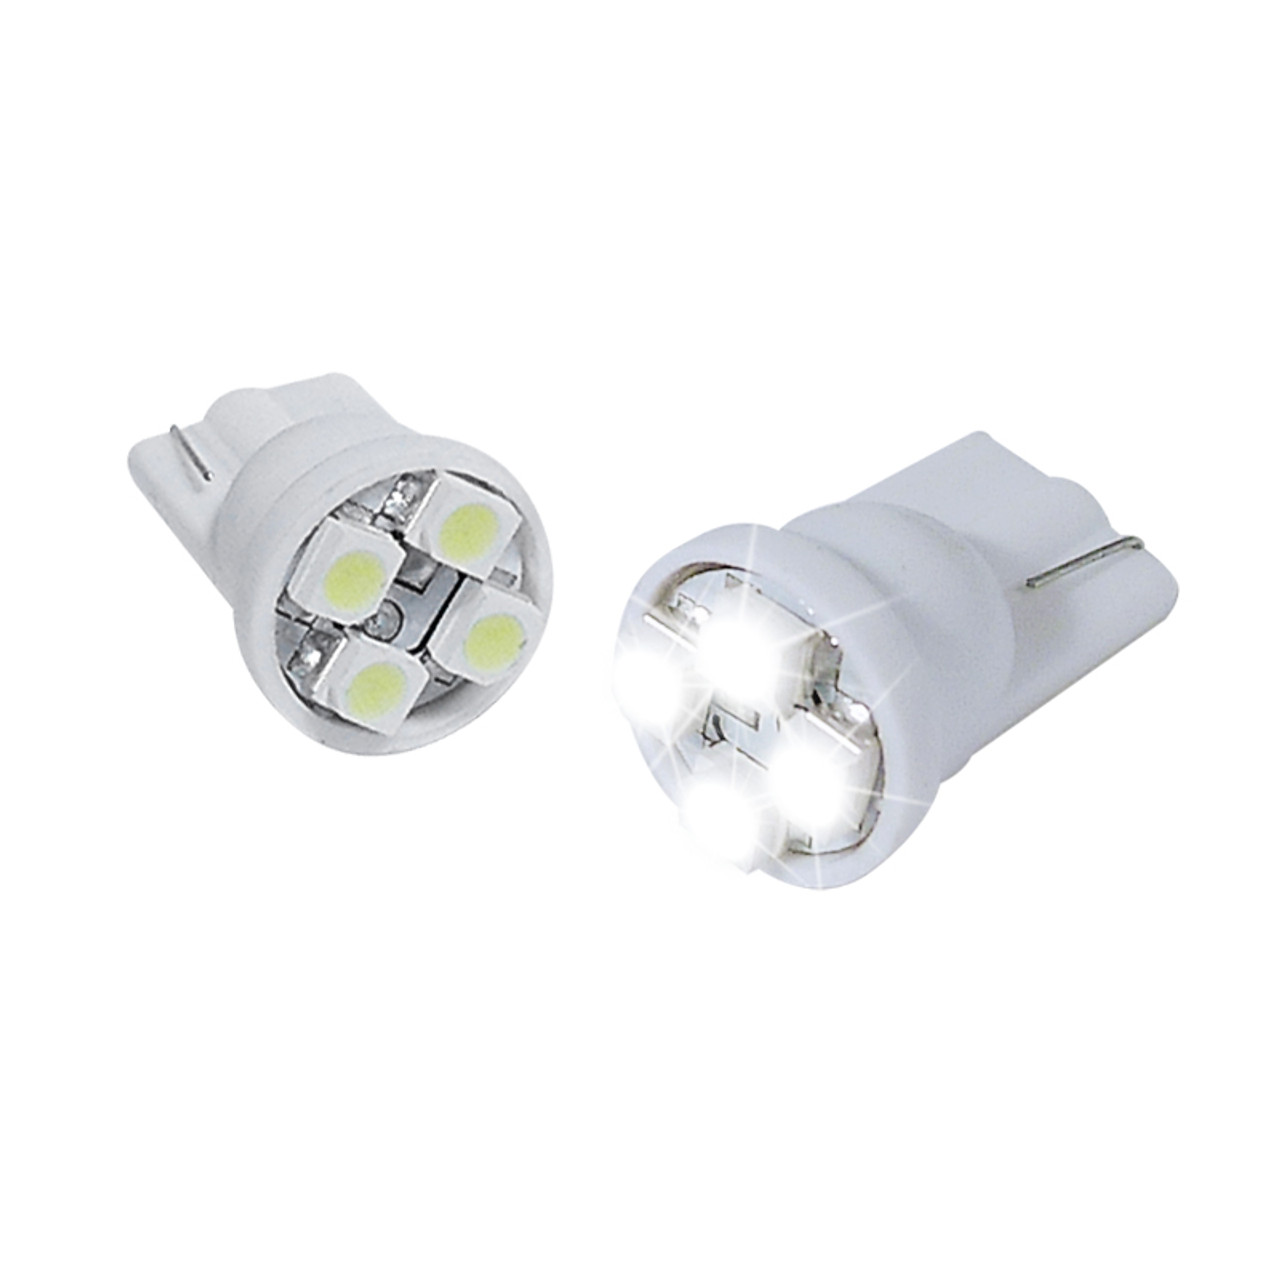 T10 4 SMD Wedge LED Bulb - 2PC (White) - Spec-D Tuning